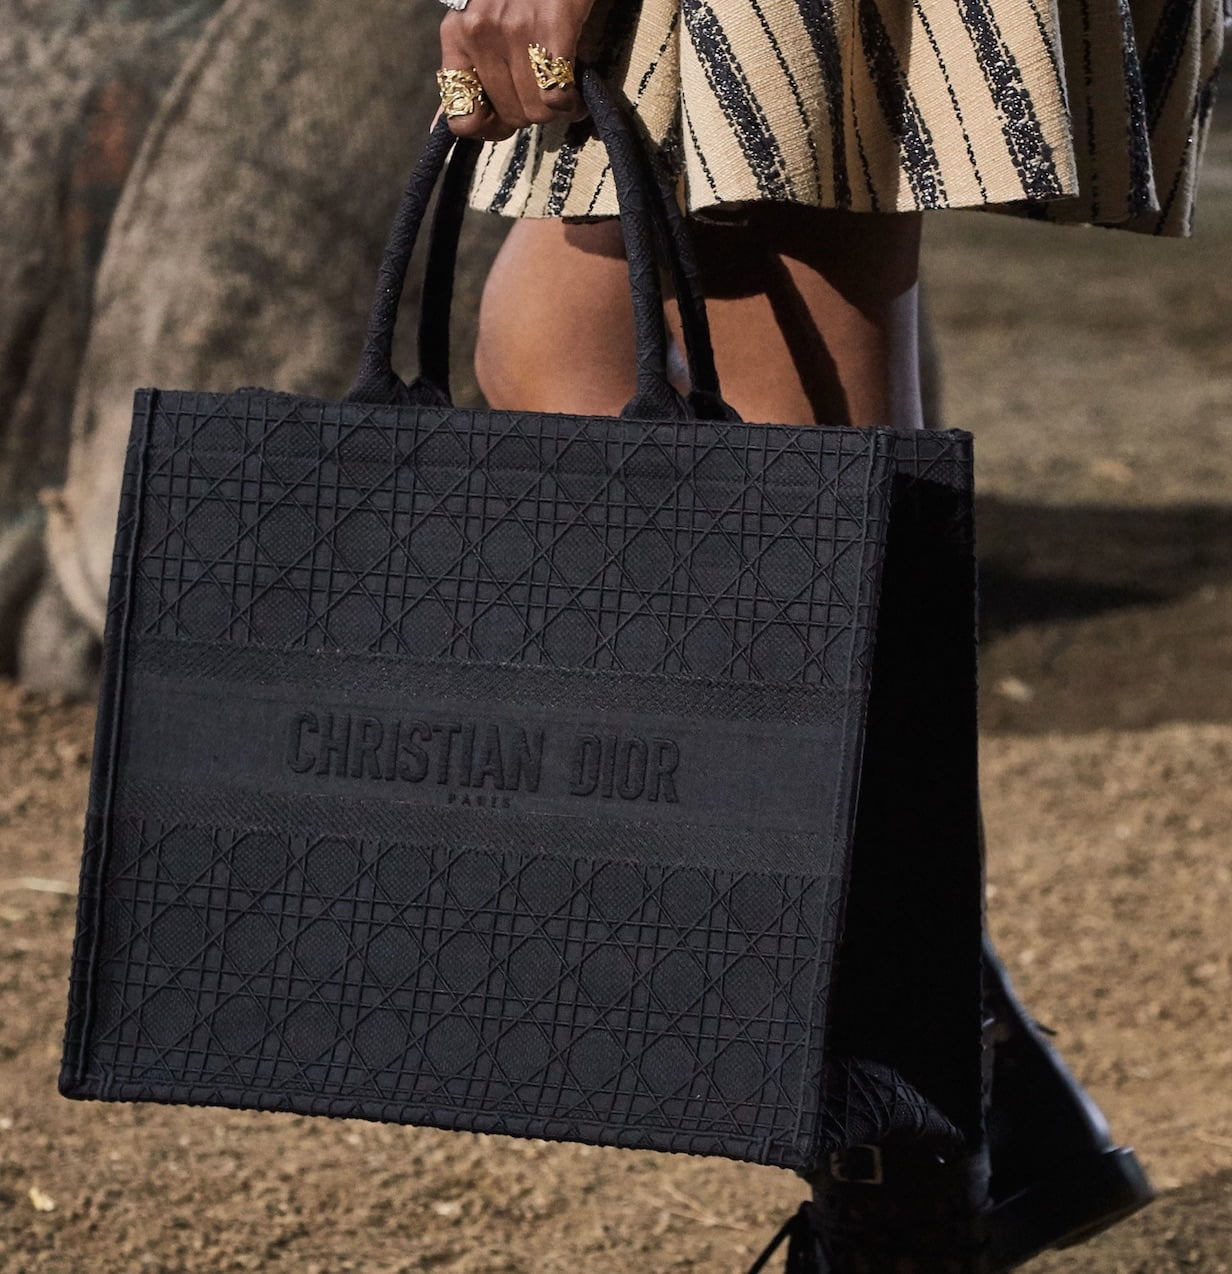 Dior Spring 2020 Introduces The Book Tote in a Smaller Size